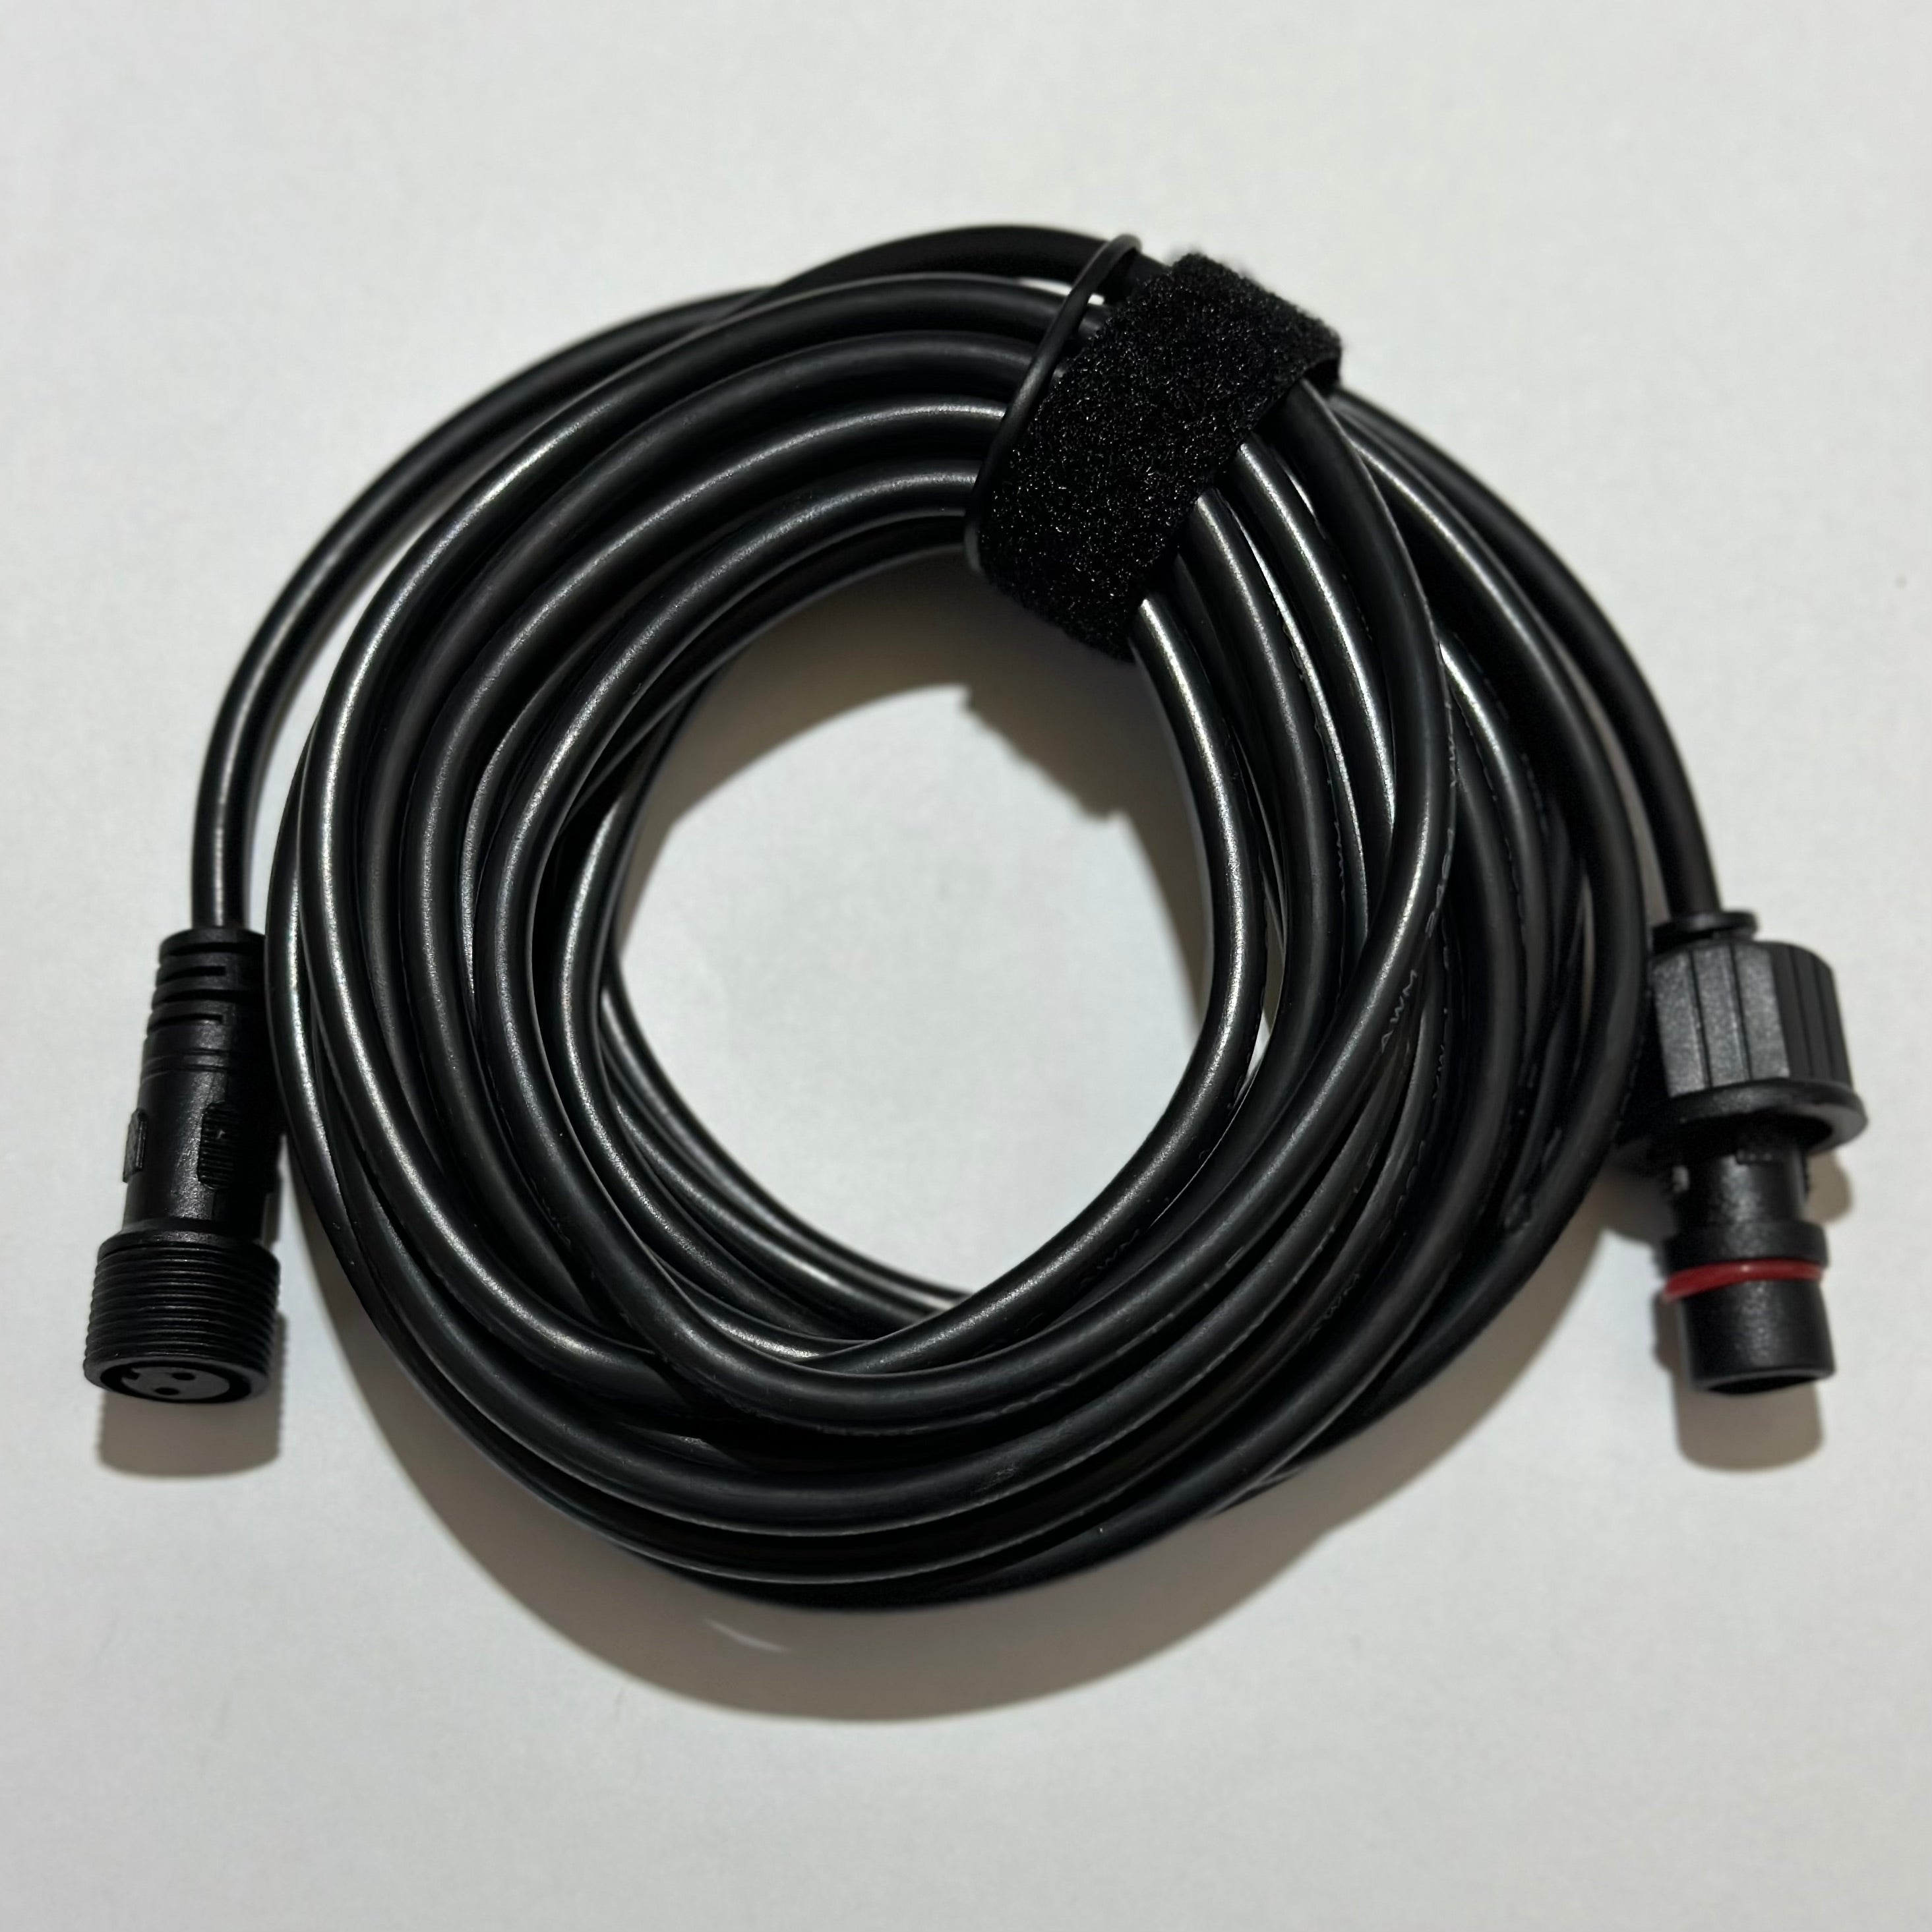 5m Power Cable for X5 Tower Light